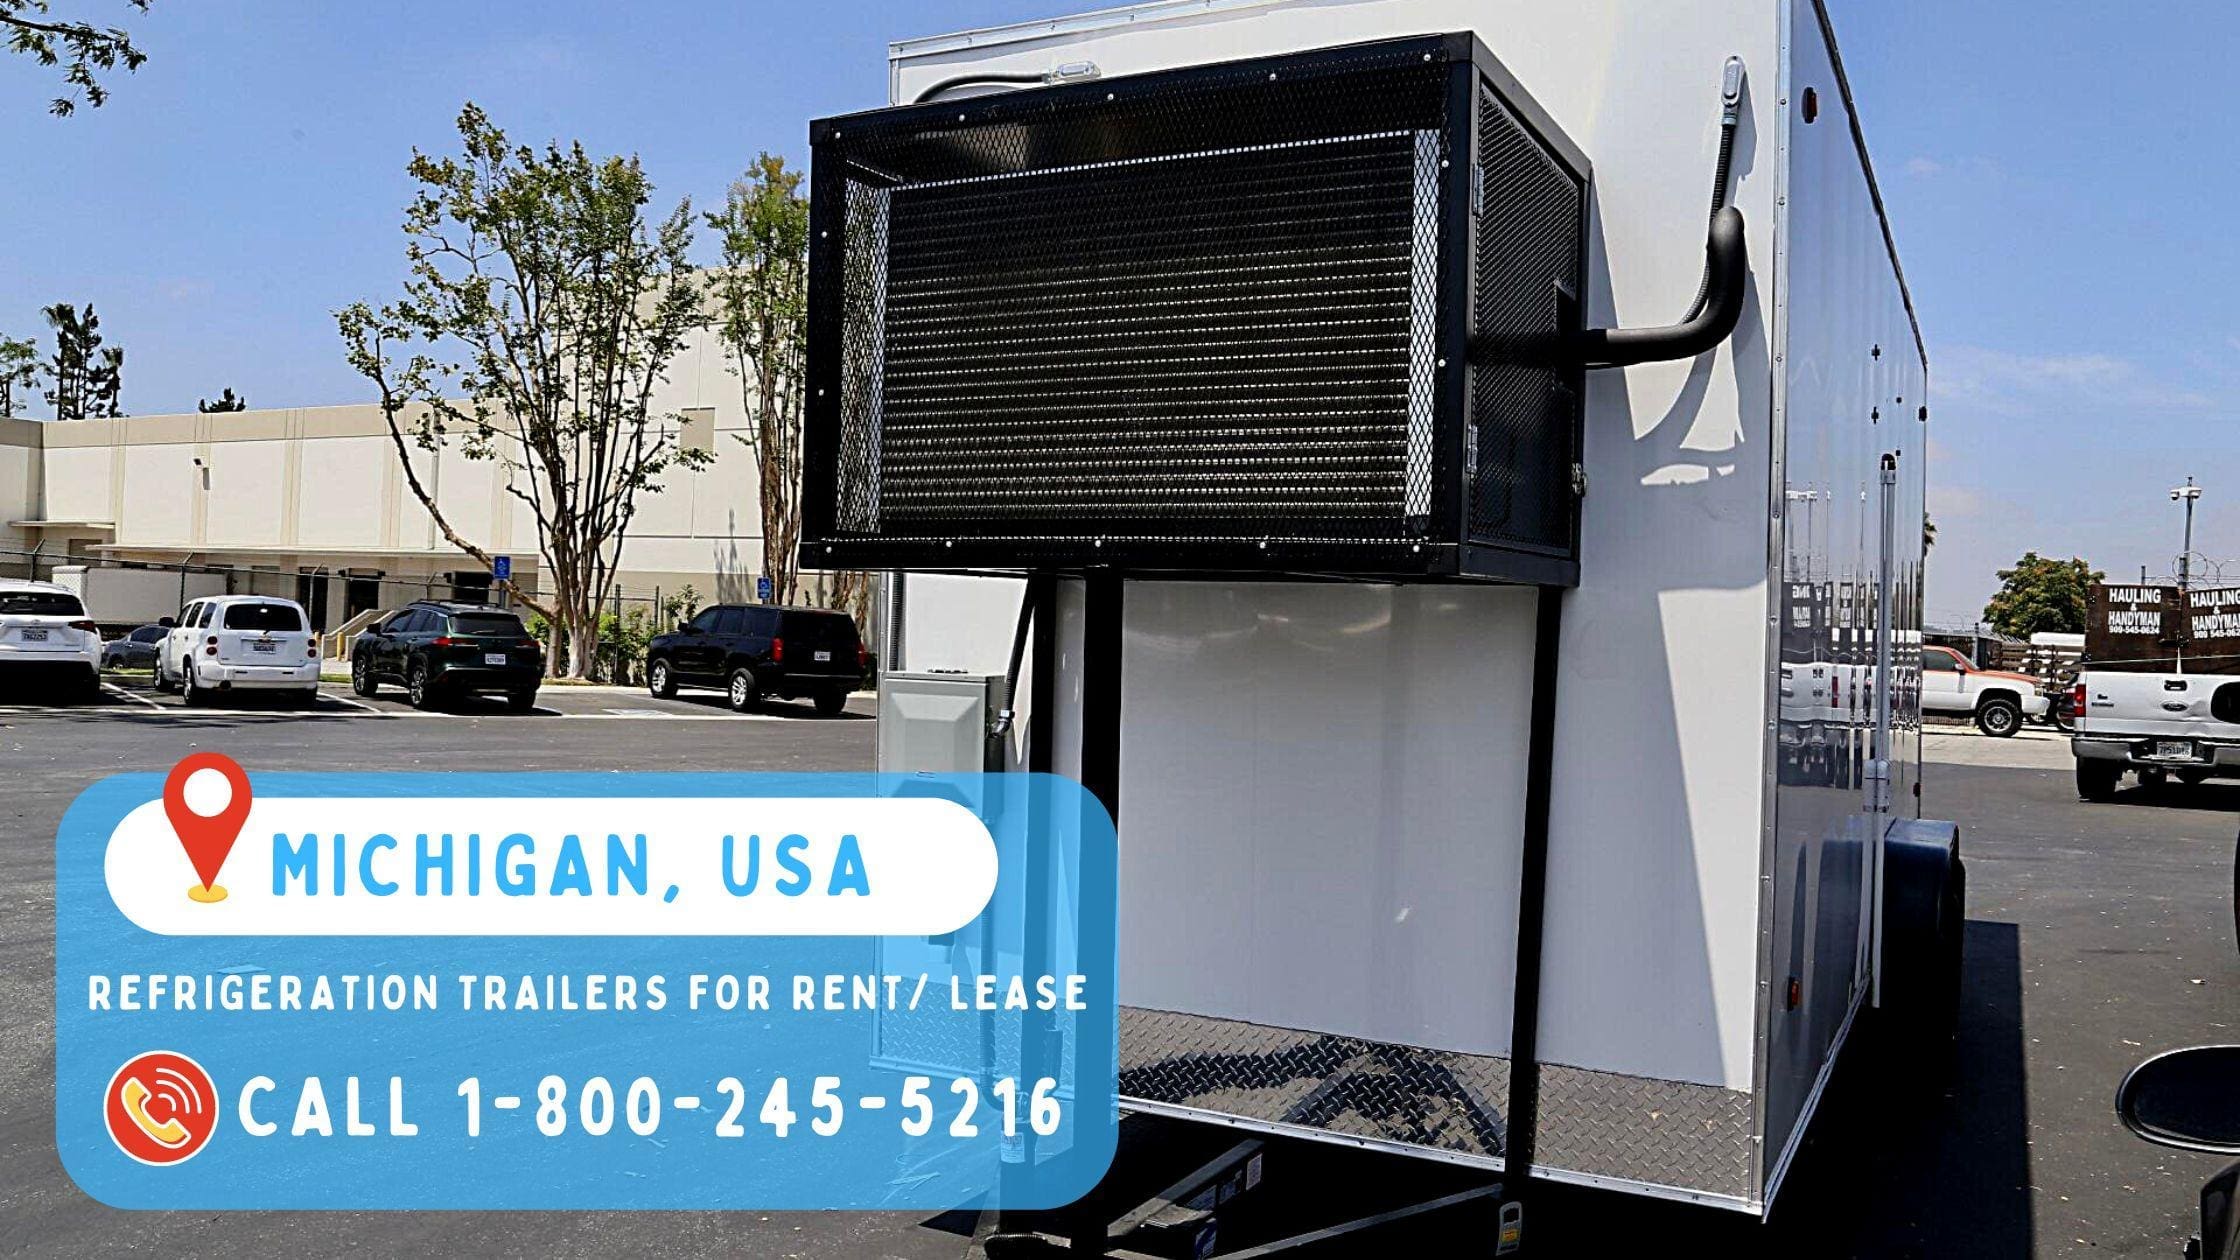 Refrigeration Trailers for Rent/ Lease in Michigan